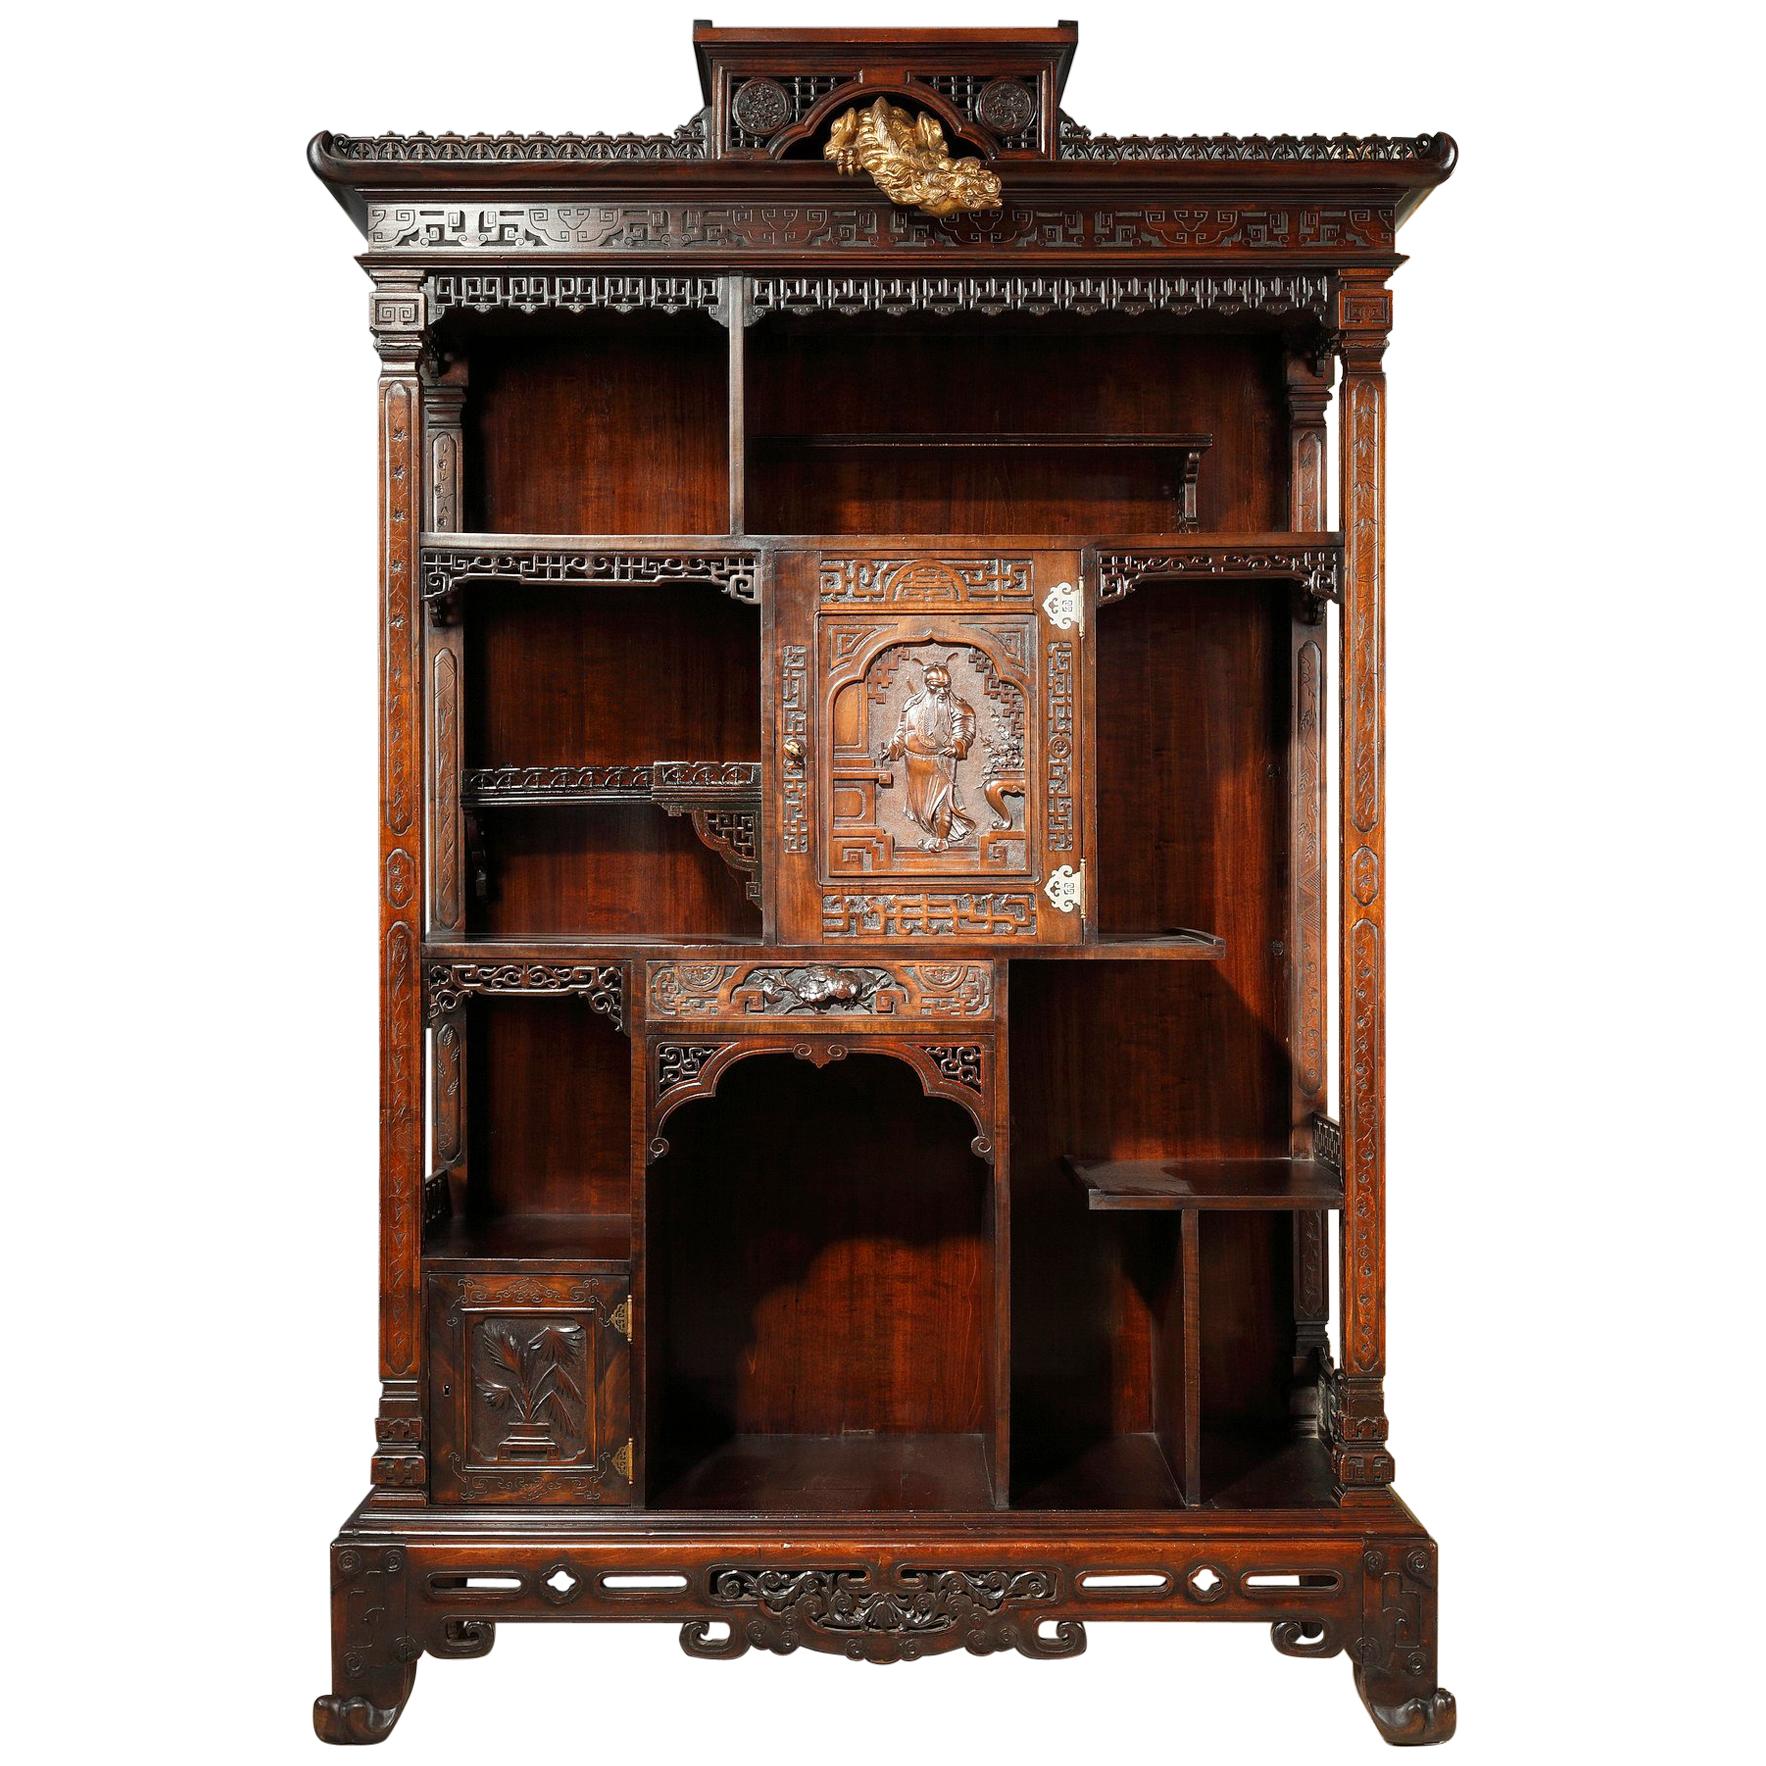 Japanese Style Cabinet Attributed to G. Viardot, France, Circa 1880